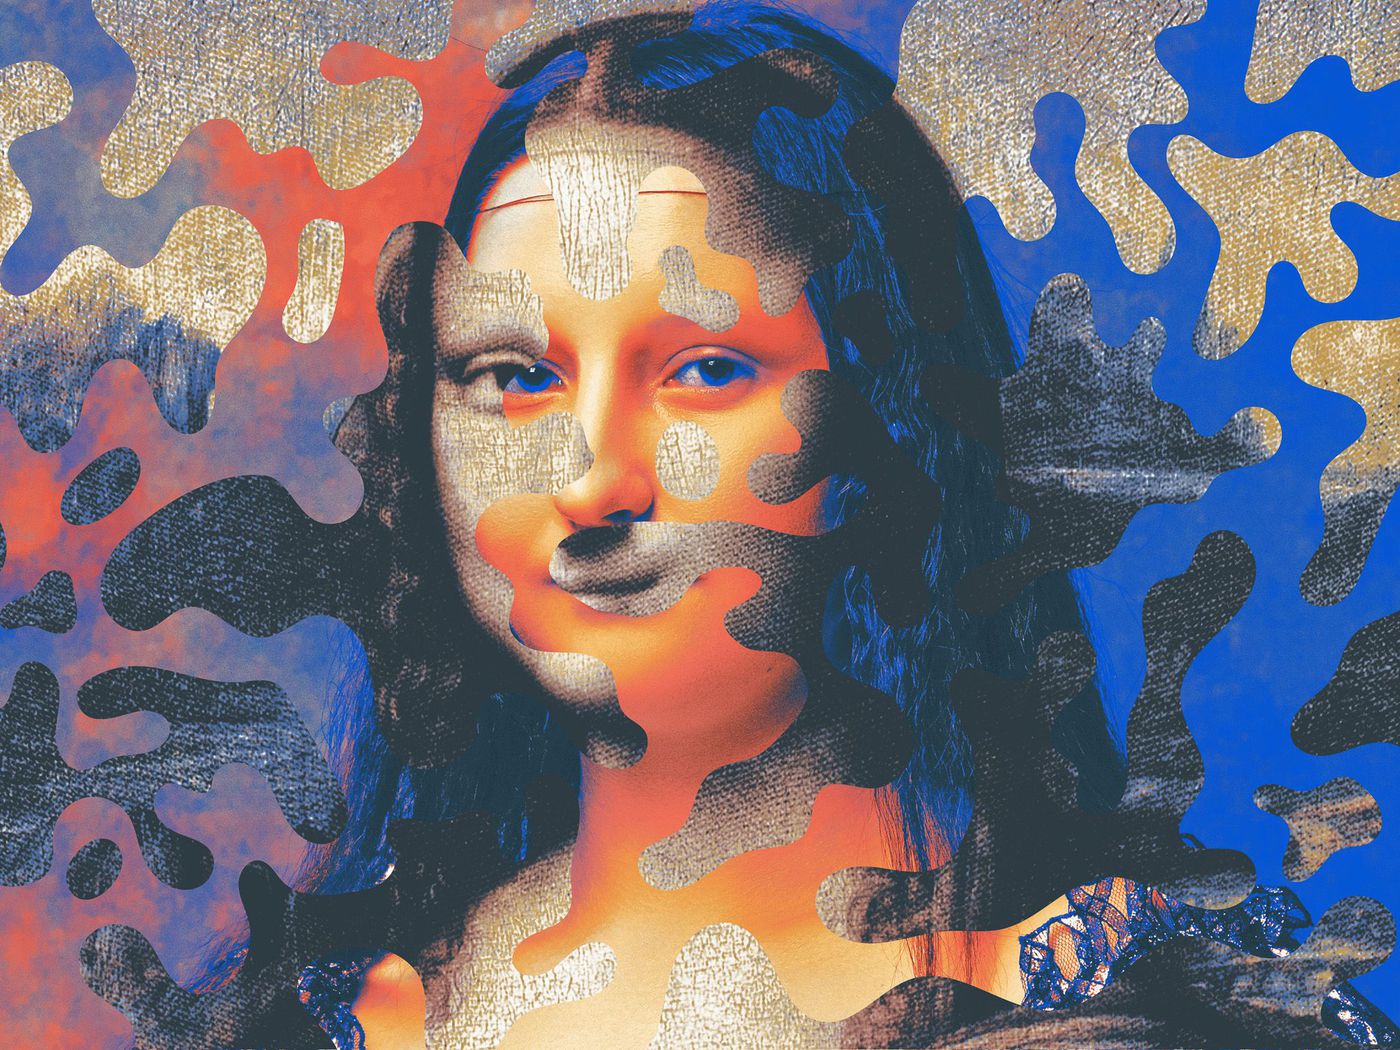 Two images of the Mona Lisa, each in a different art style: one classical and the other more modern and abstract with vibrant colors.